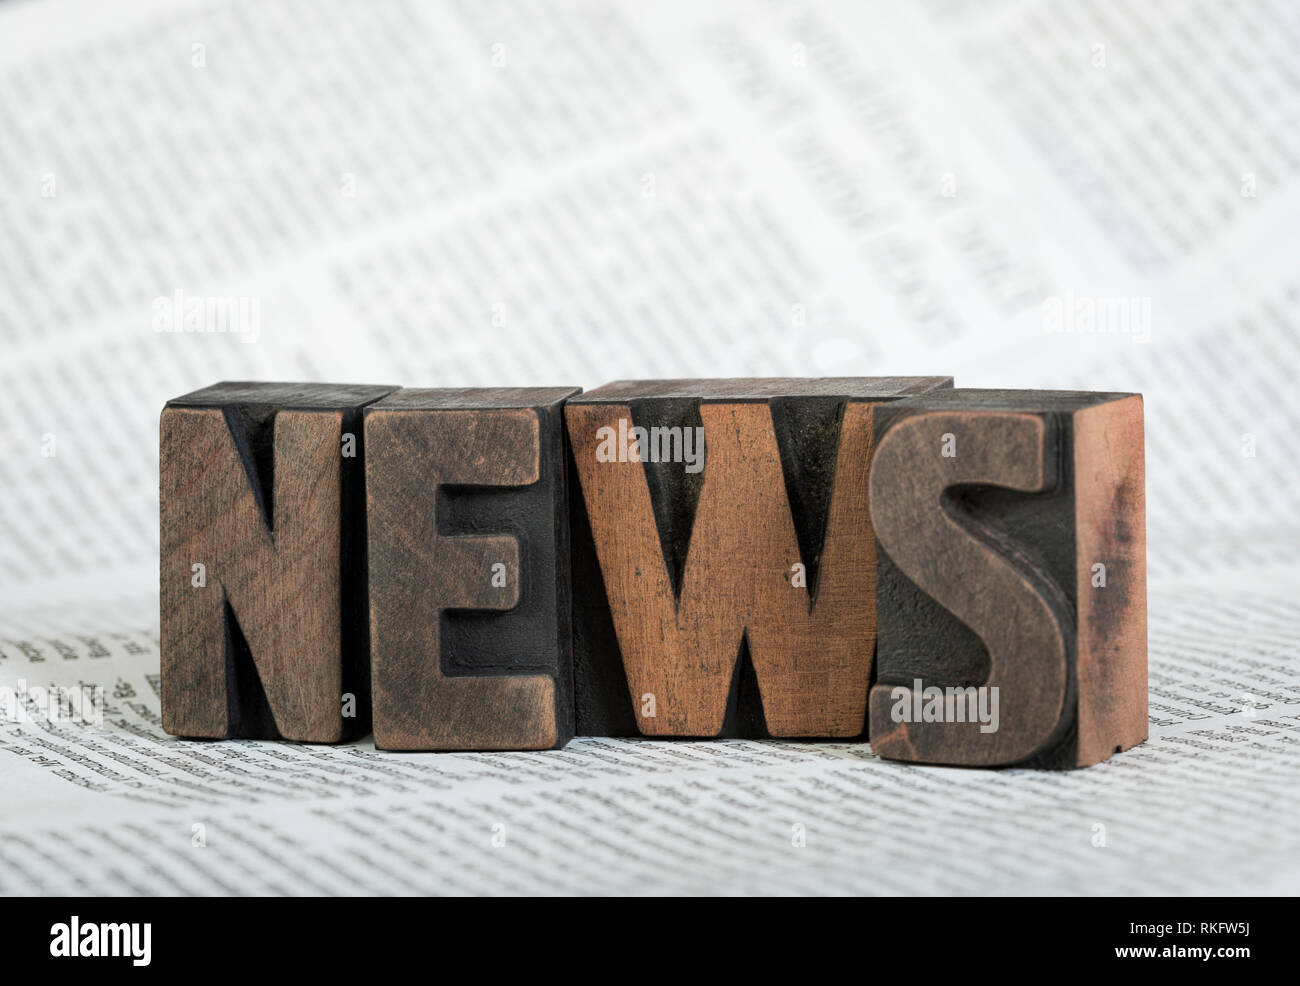 News, word written with vintage wooden letterpress printing blocks on newspaper, shallow depth of field Stock Photo